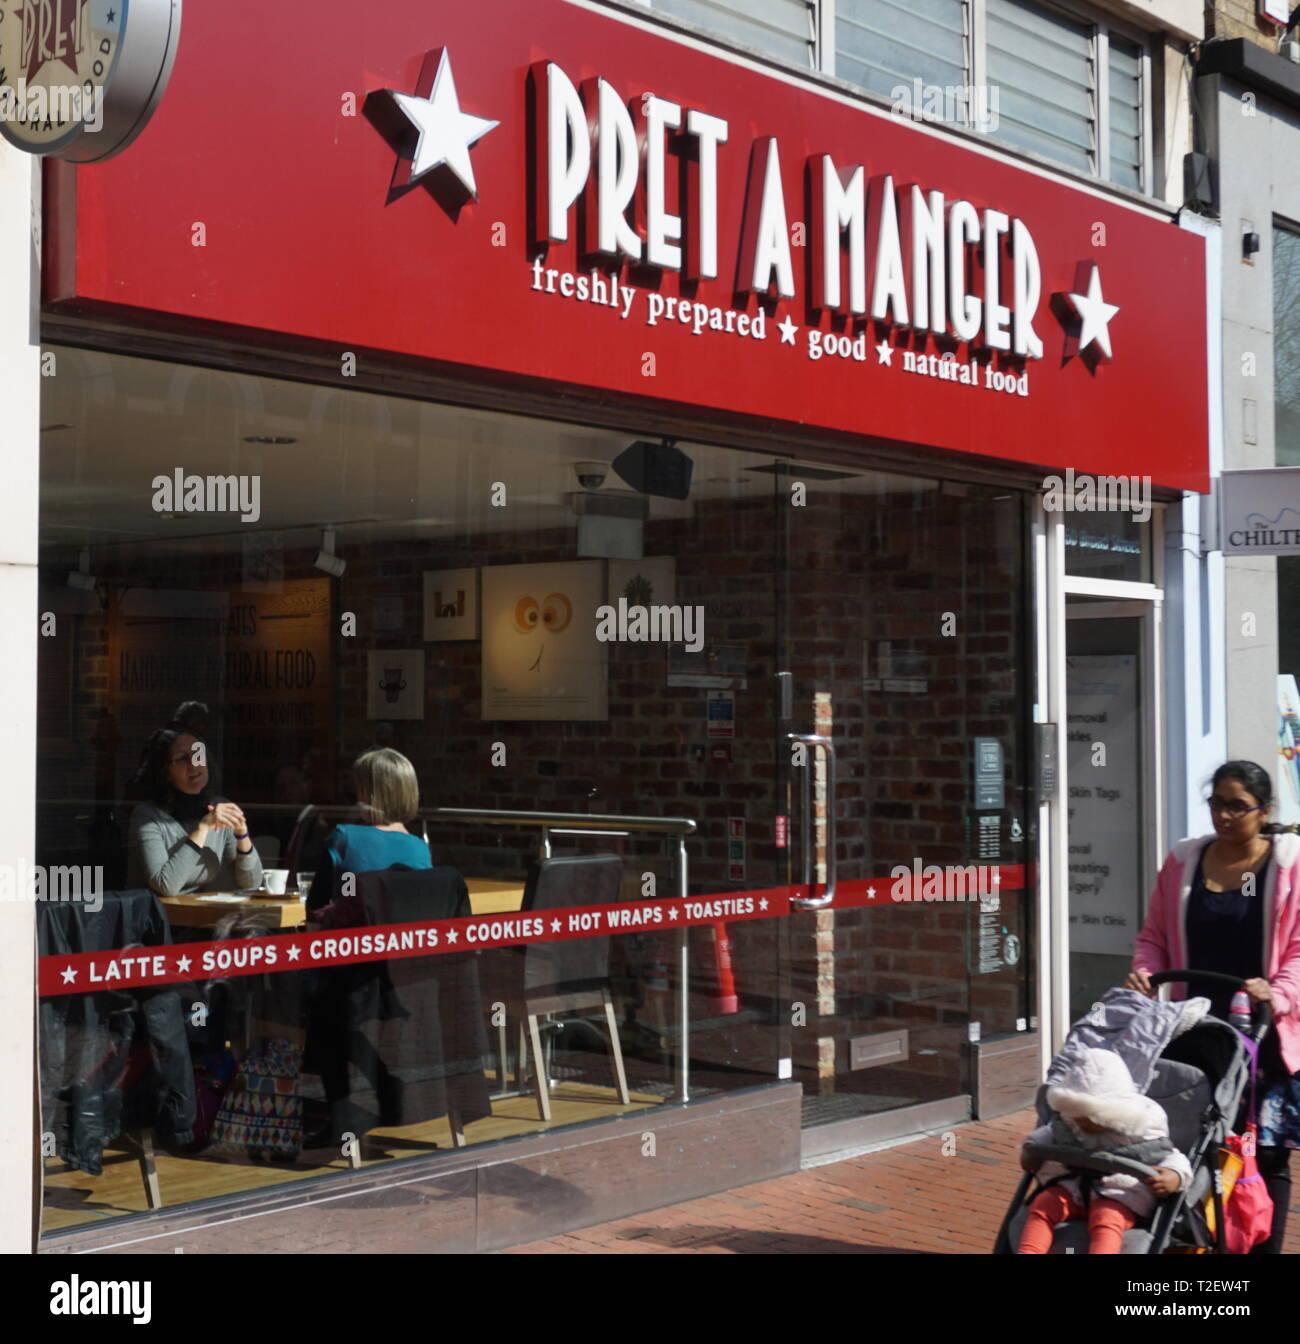 Pret a manger fast food store in Broad Street, Reading, UK Stock Photo